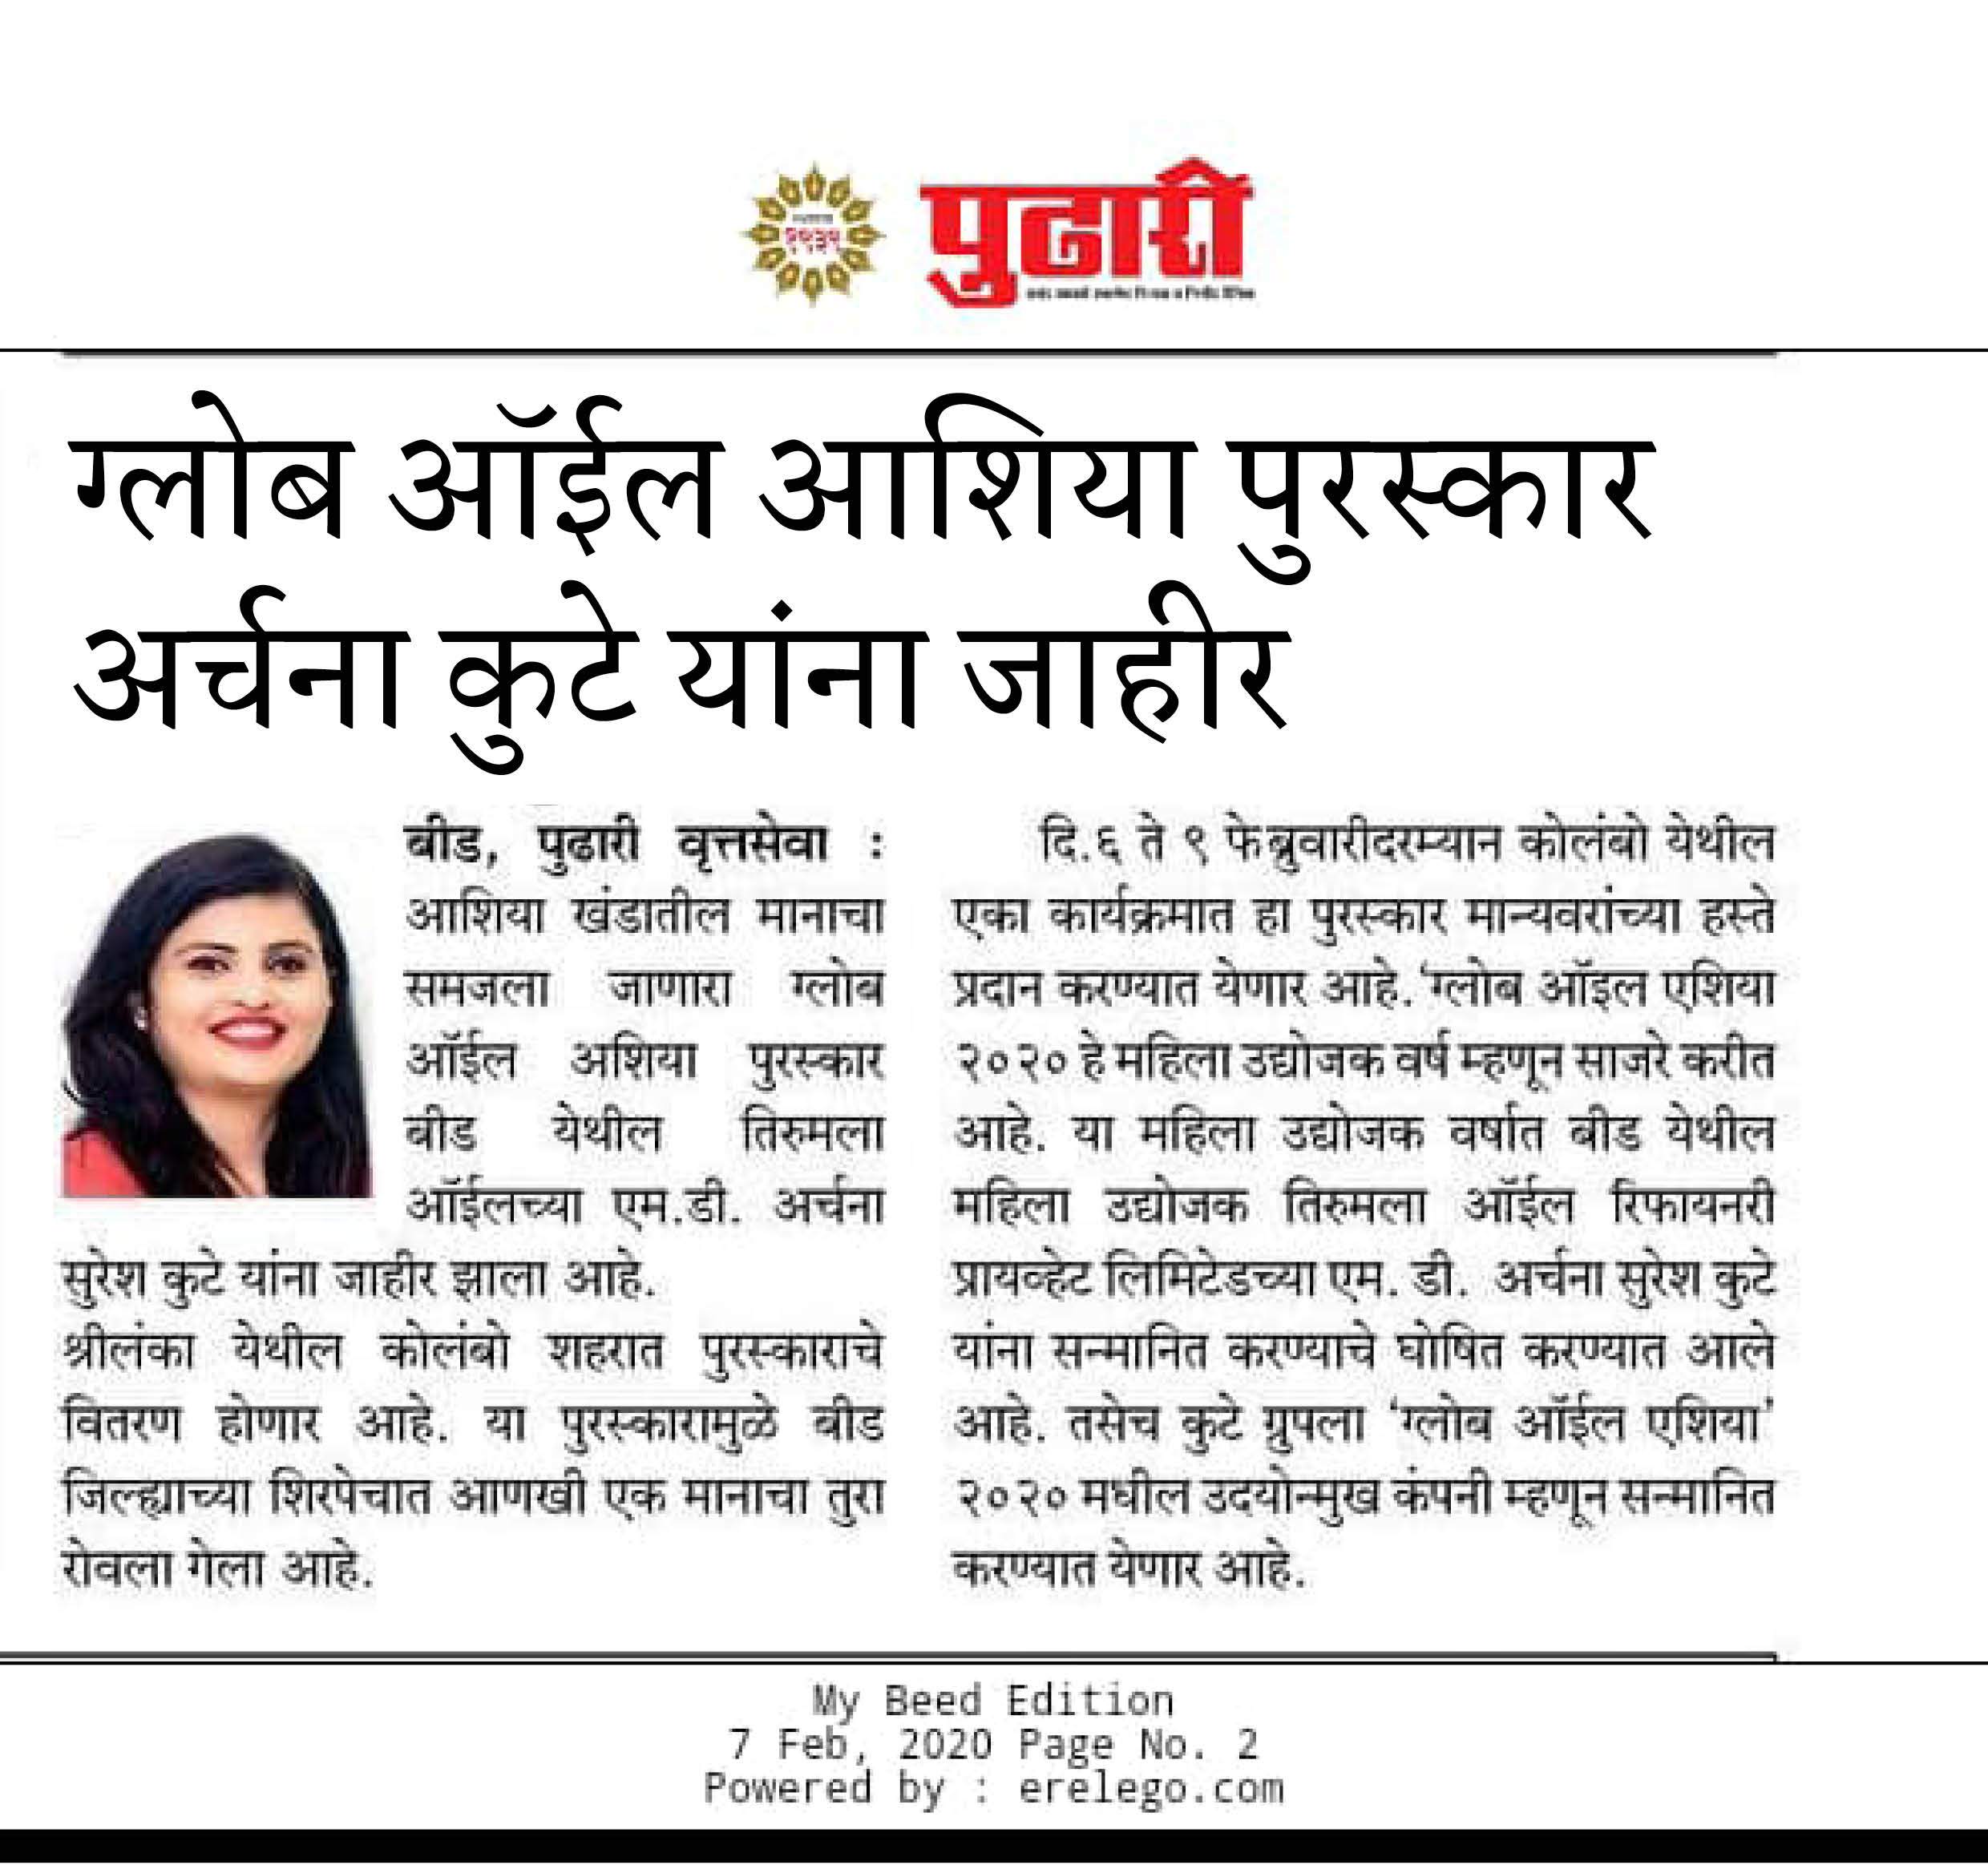 Daily Pudhari published news about Archana Kute awarded Globoil Asia Women Entrepreneur Of The Year 2020 Award